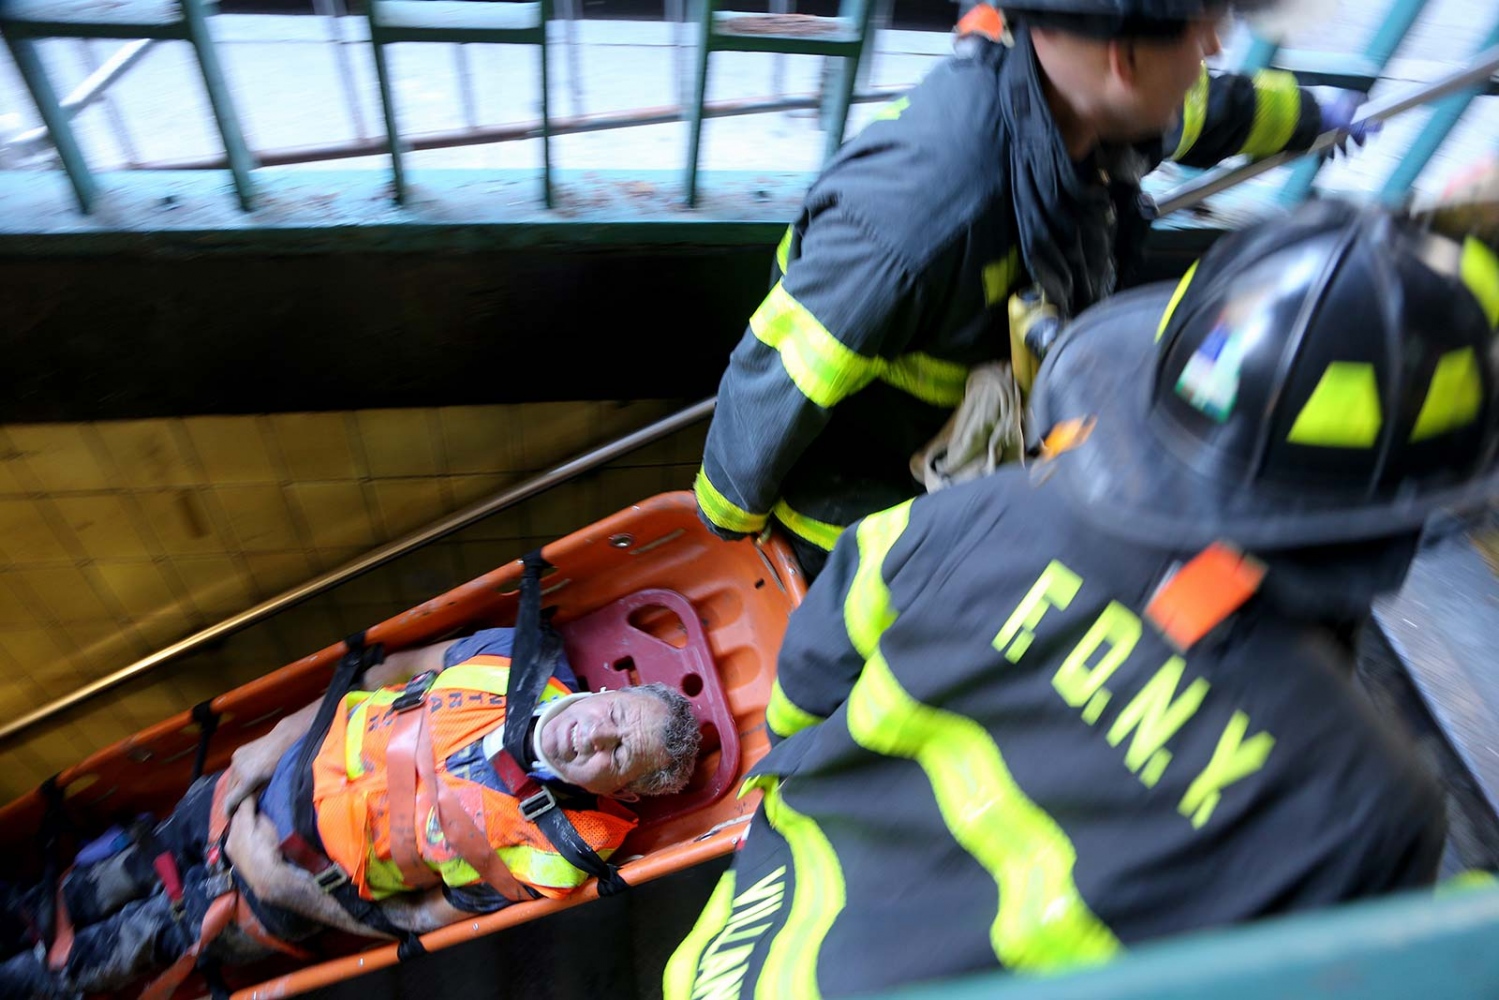  Firefighters rescue an MTA worker who fell on subway tracks while working on repairs at the 57th St. F train station in Midtown on Sunday morning. 